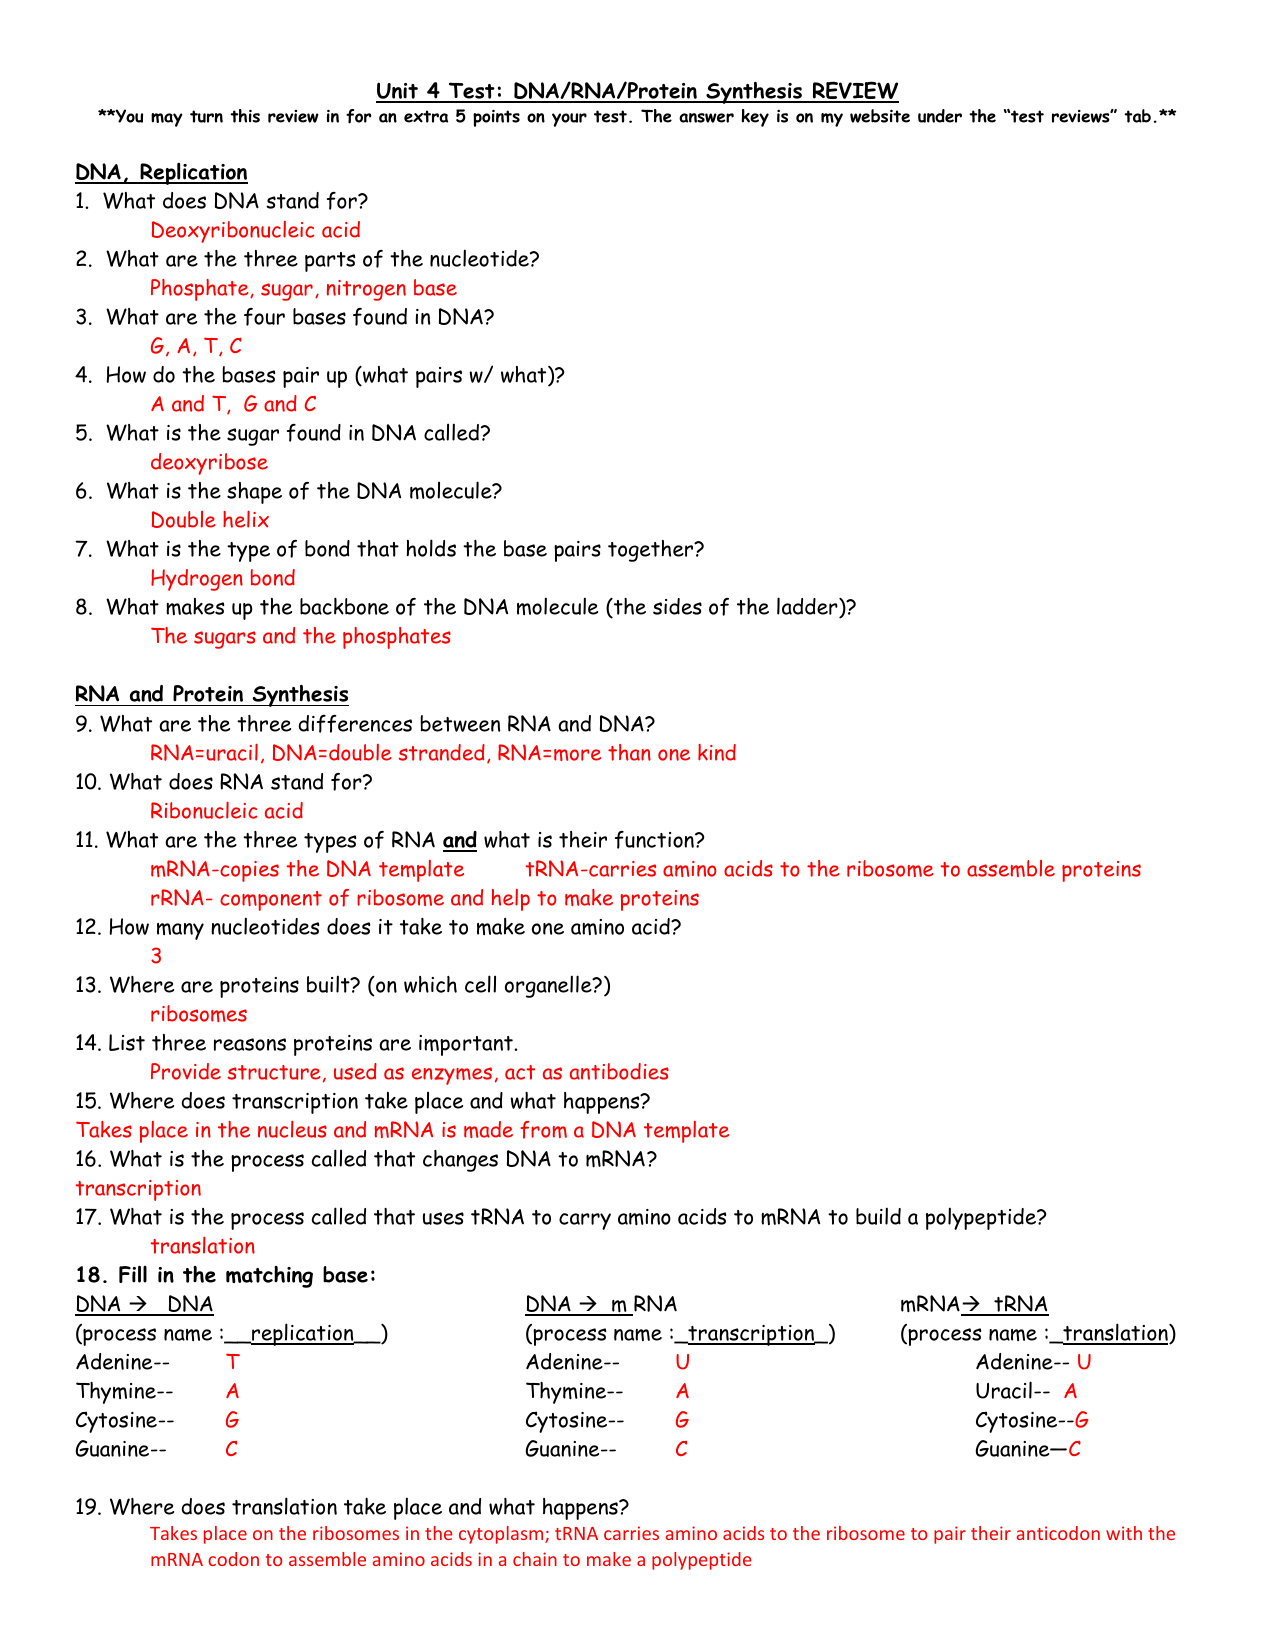 RNA and Protein Synthesis With Regard To Protein Synthesis Review Worksheet Answers